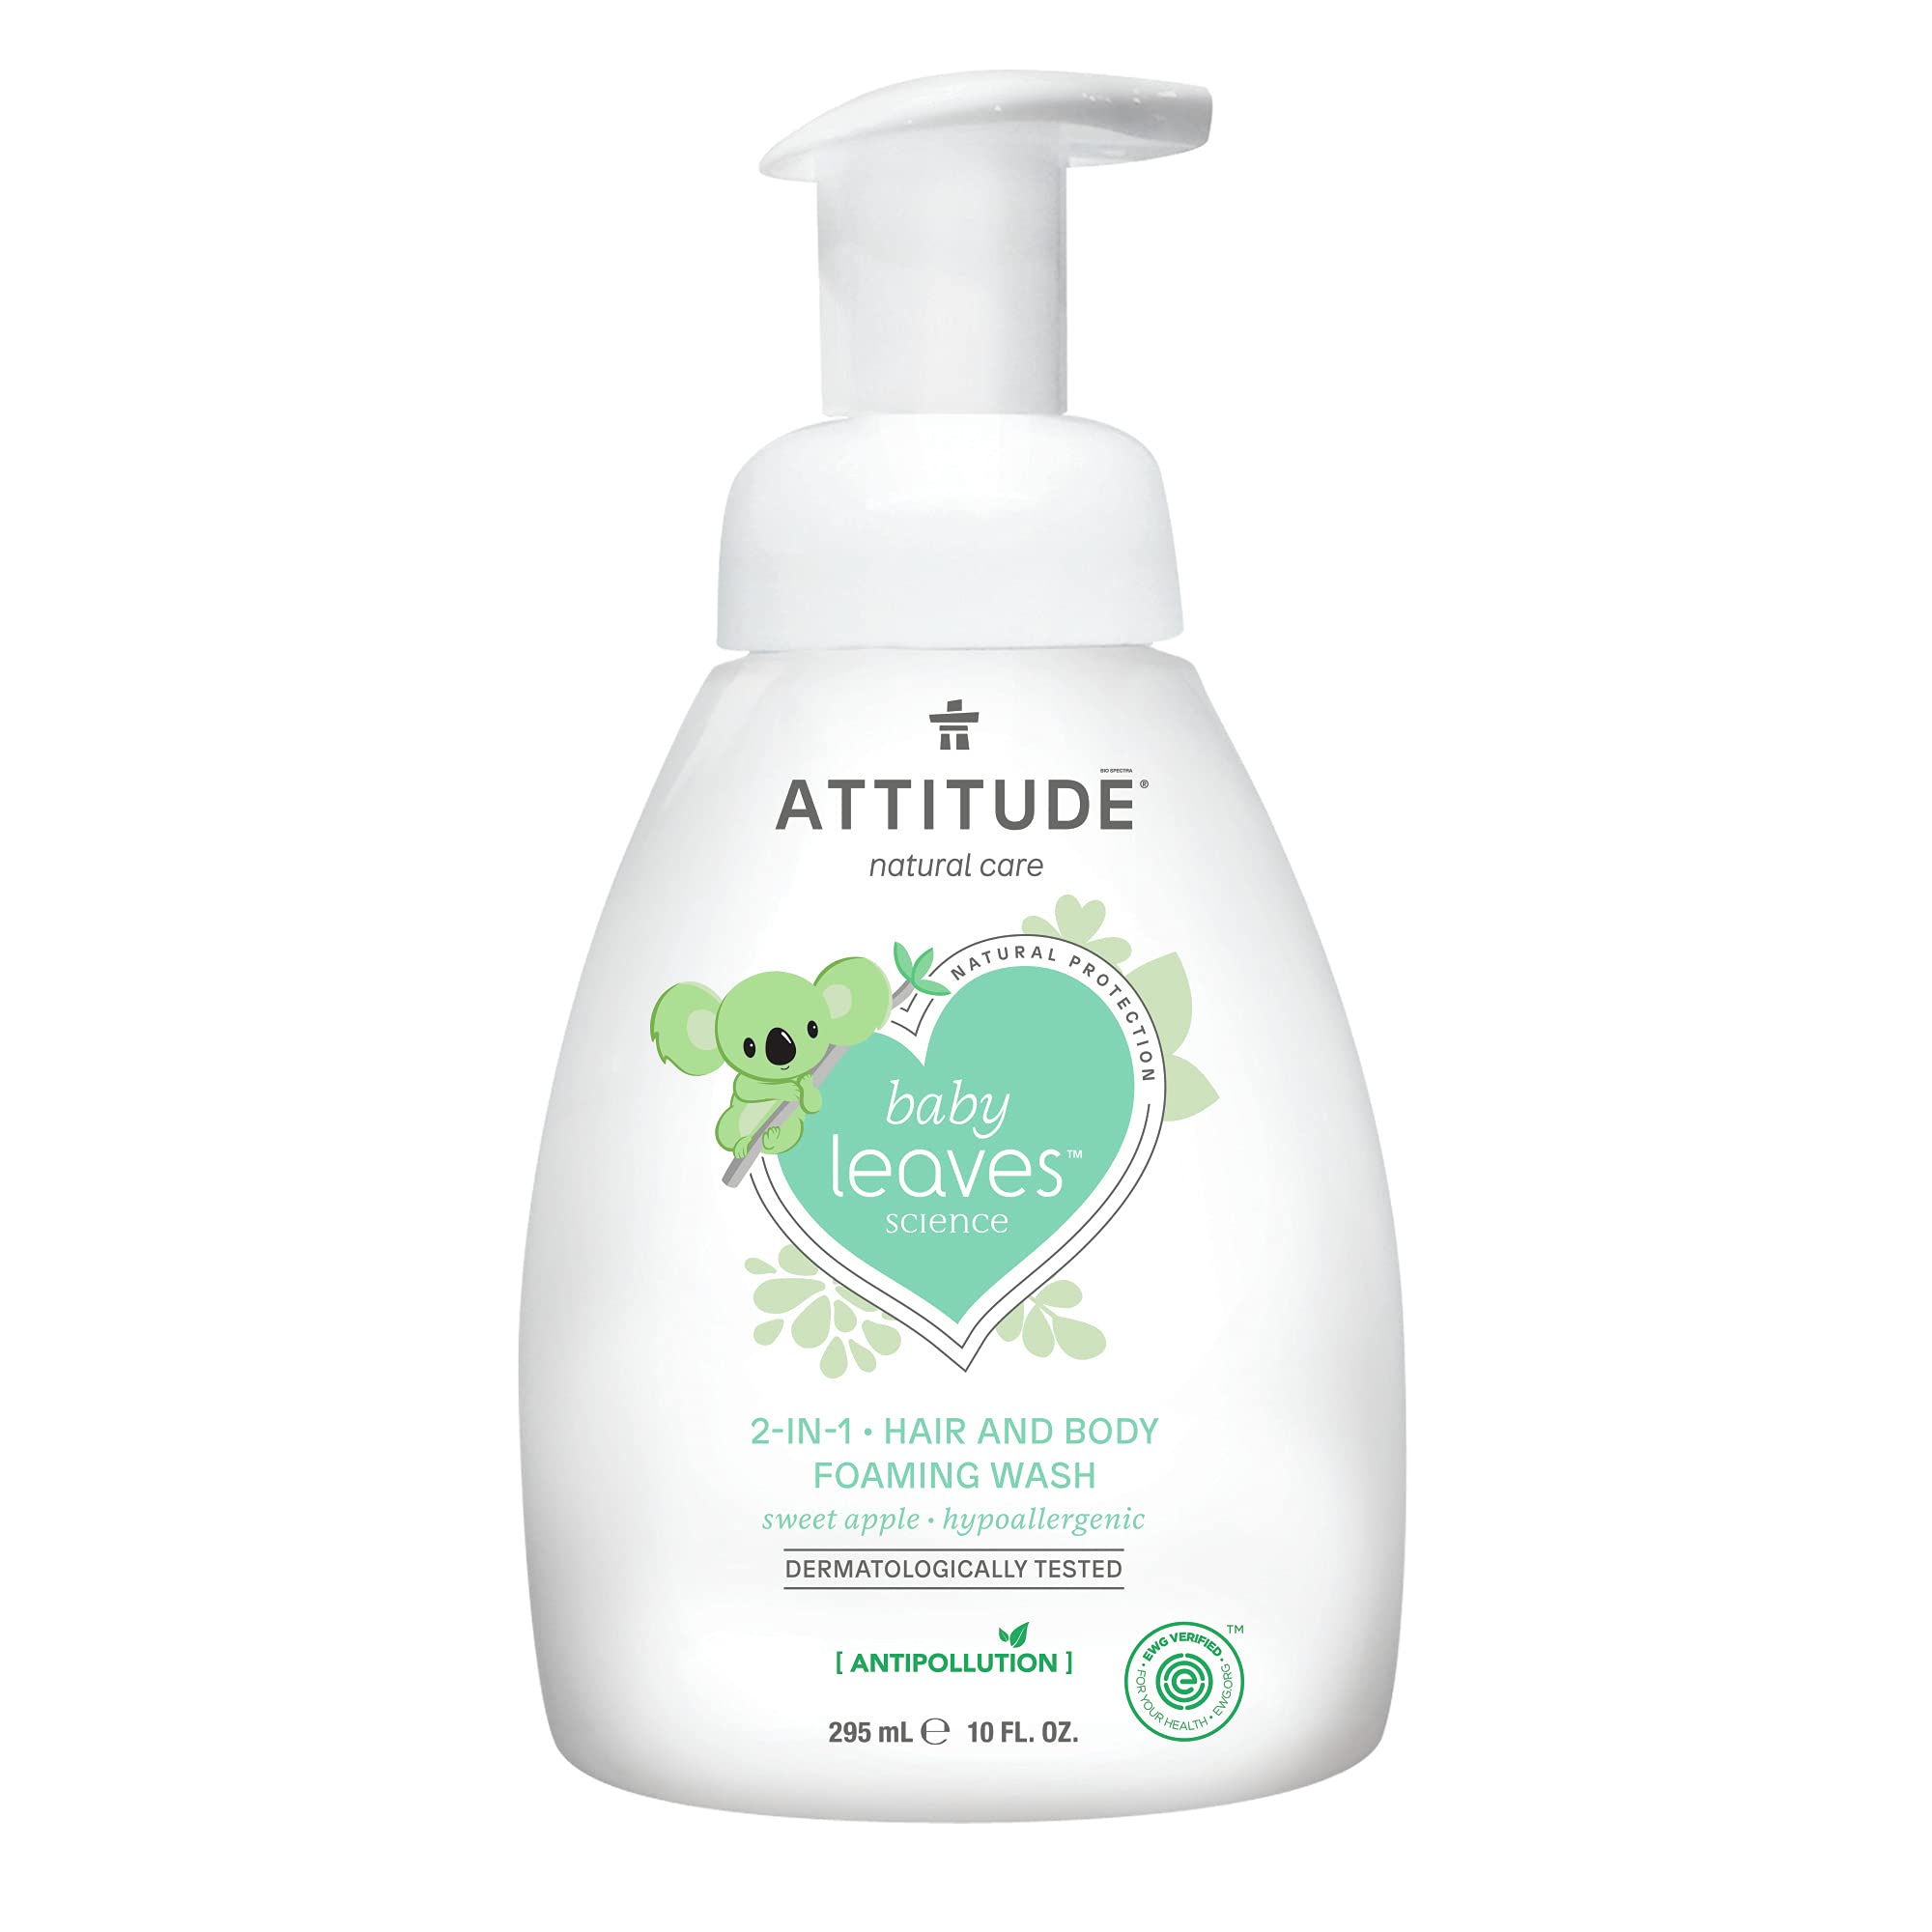 ATTITUDE 2-in-1 Natural Hair and Body Foaming Wash for Baby, EWG Verified Shampoo, Hypoallergenic Bath Soap, Sweet Apple, 10 Fl. Oz.